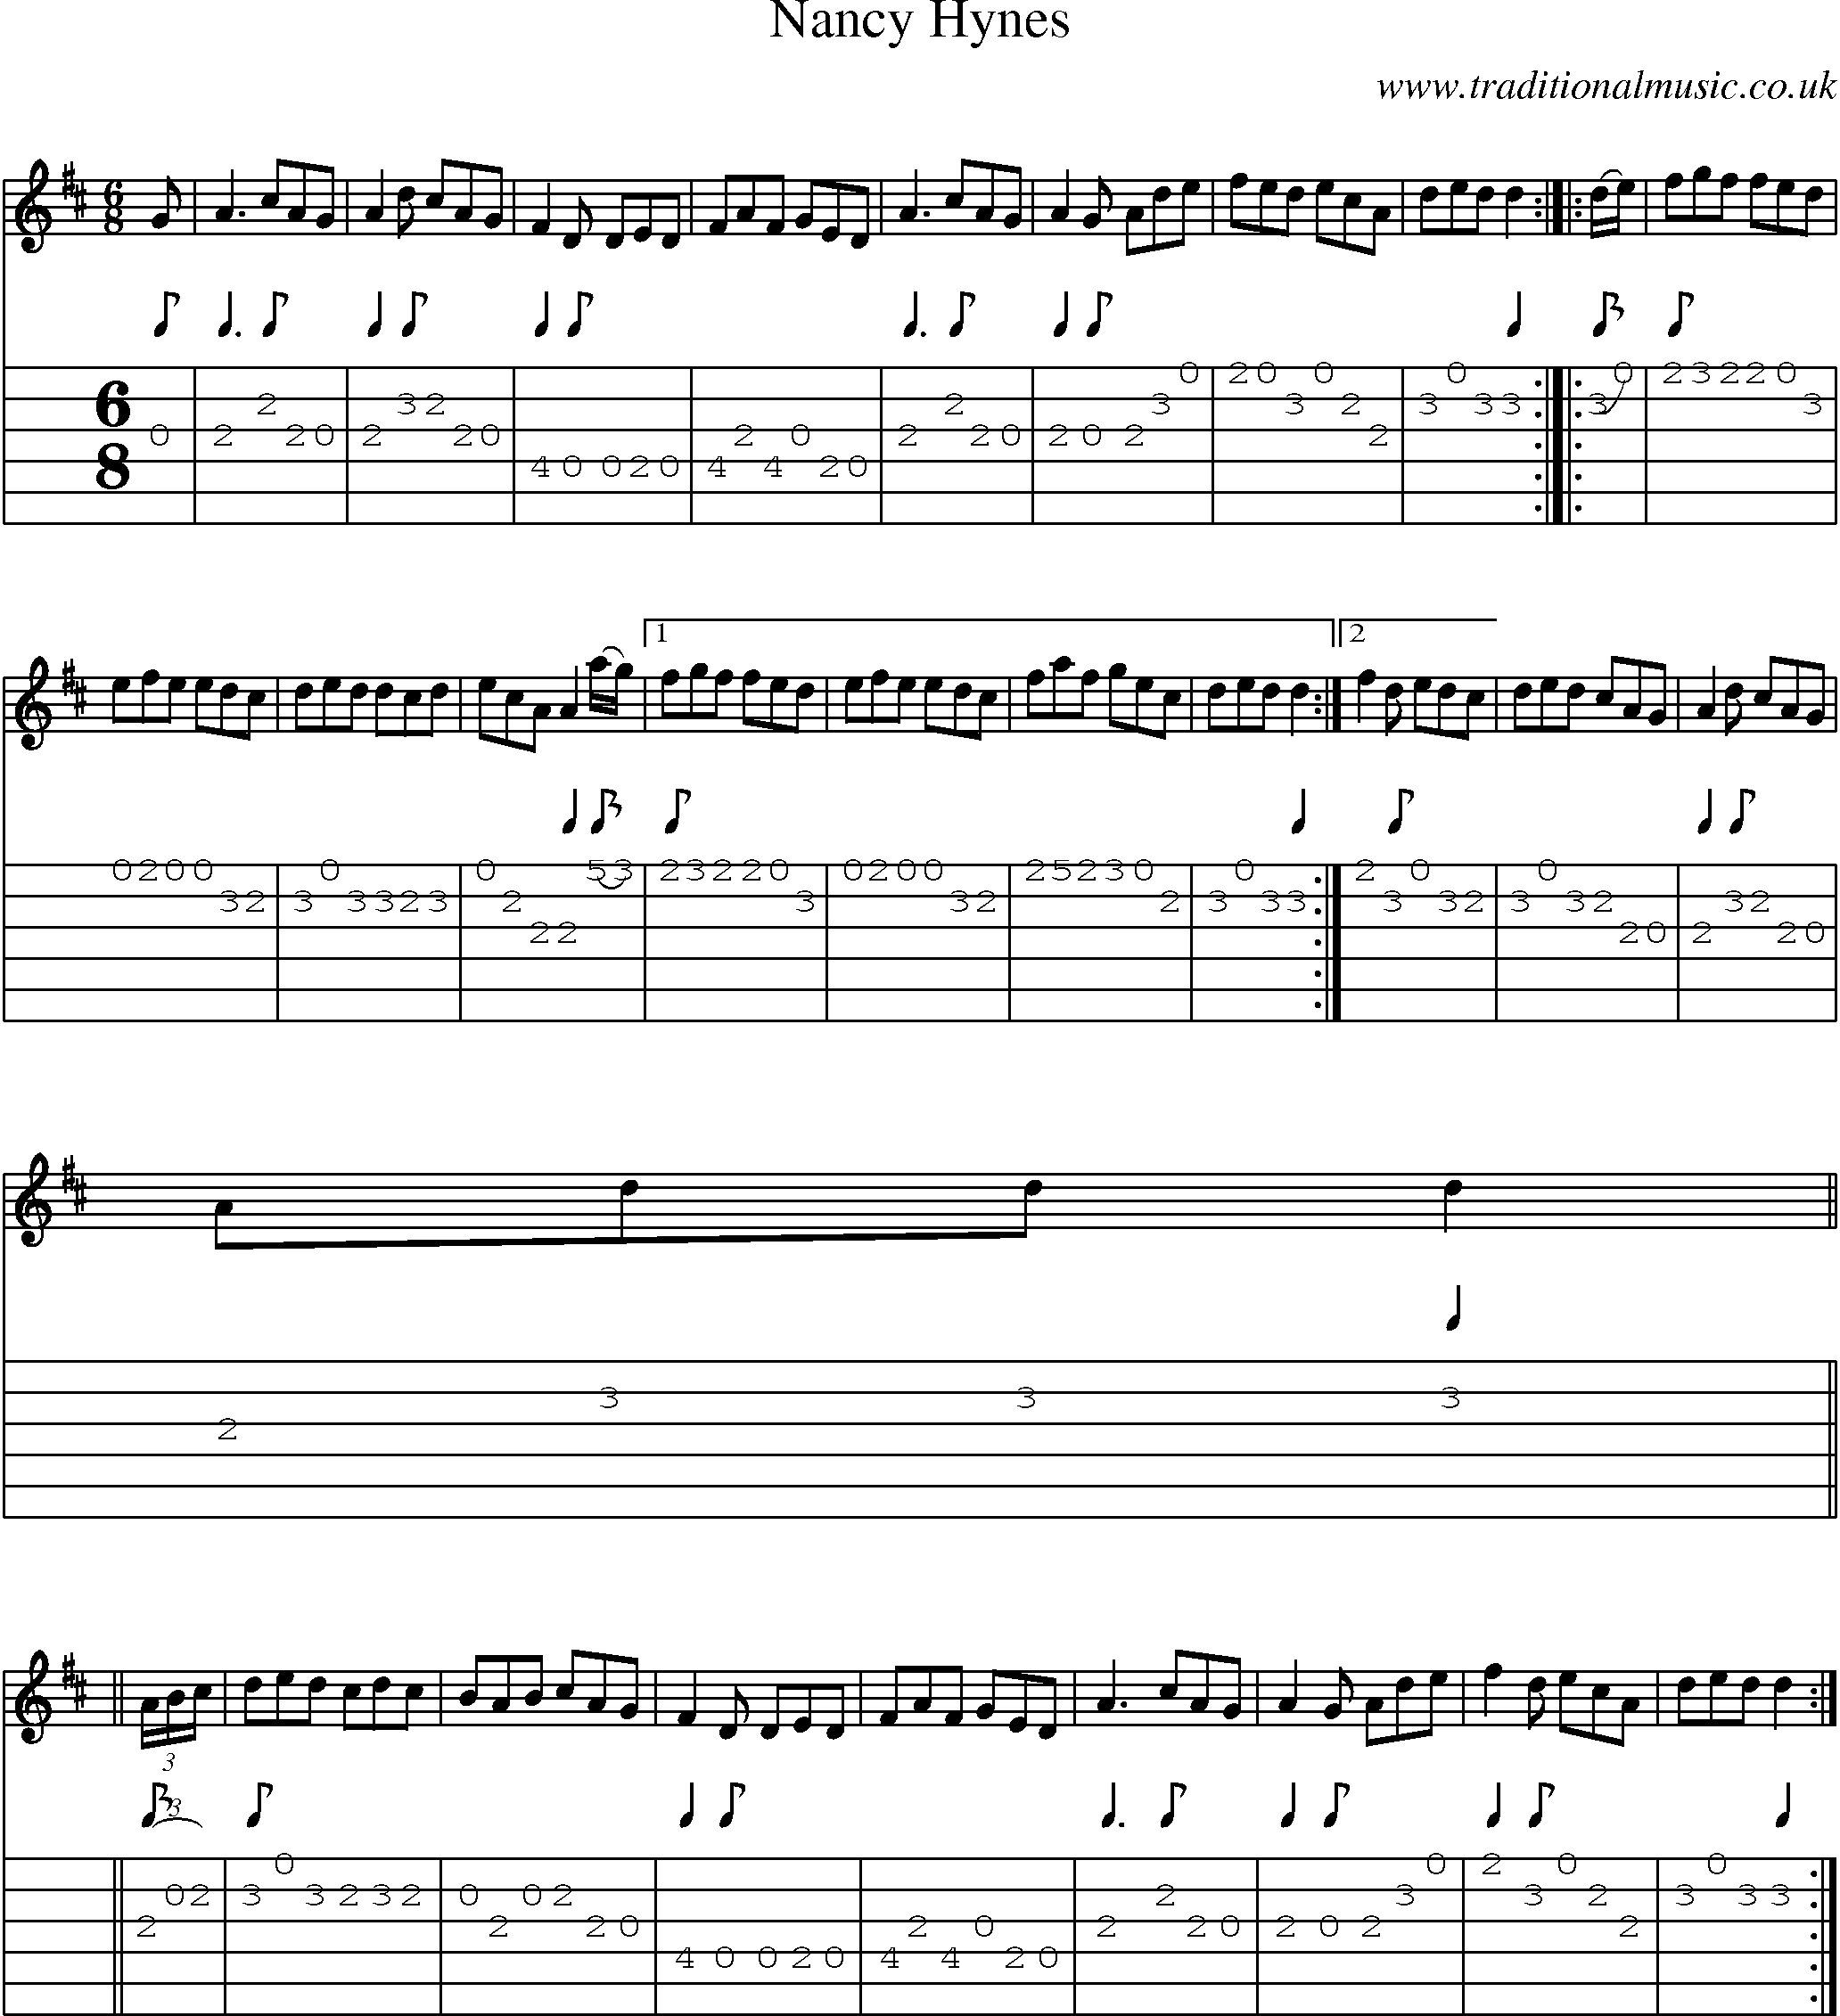 Music Score and Guitar Tabs for Nancy Hynes